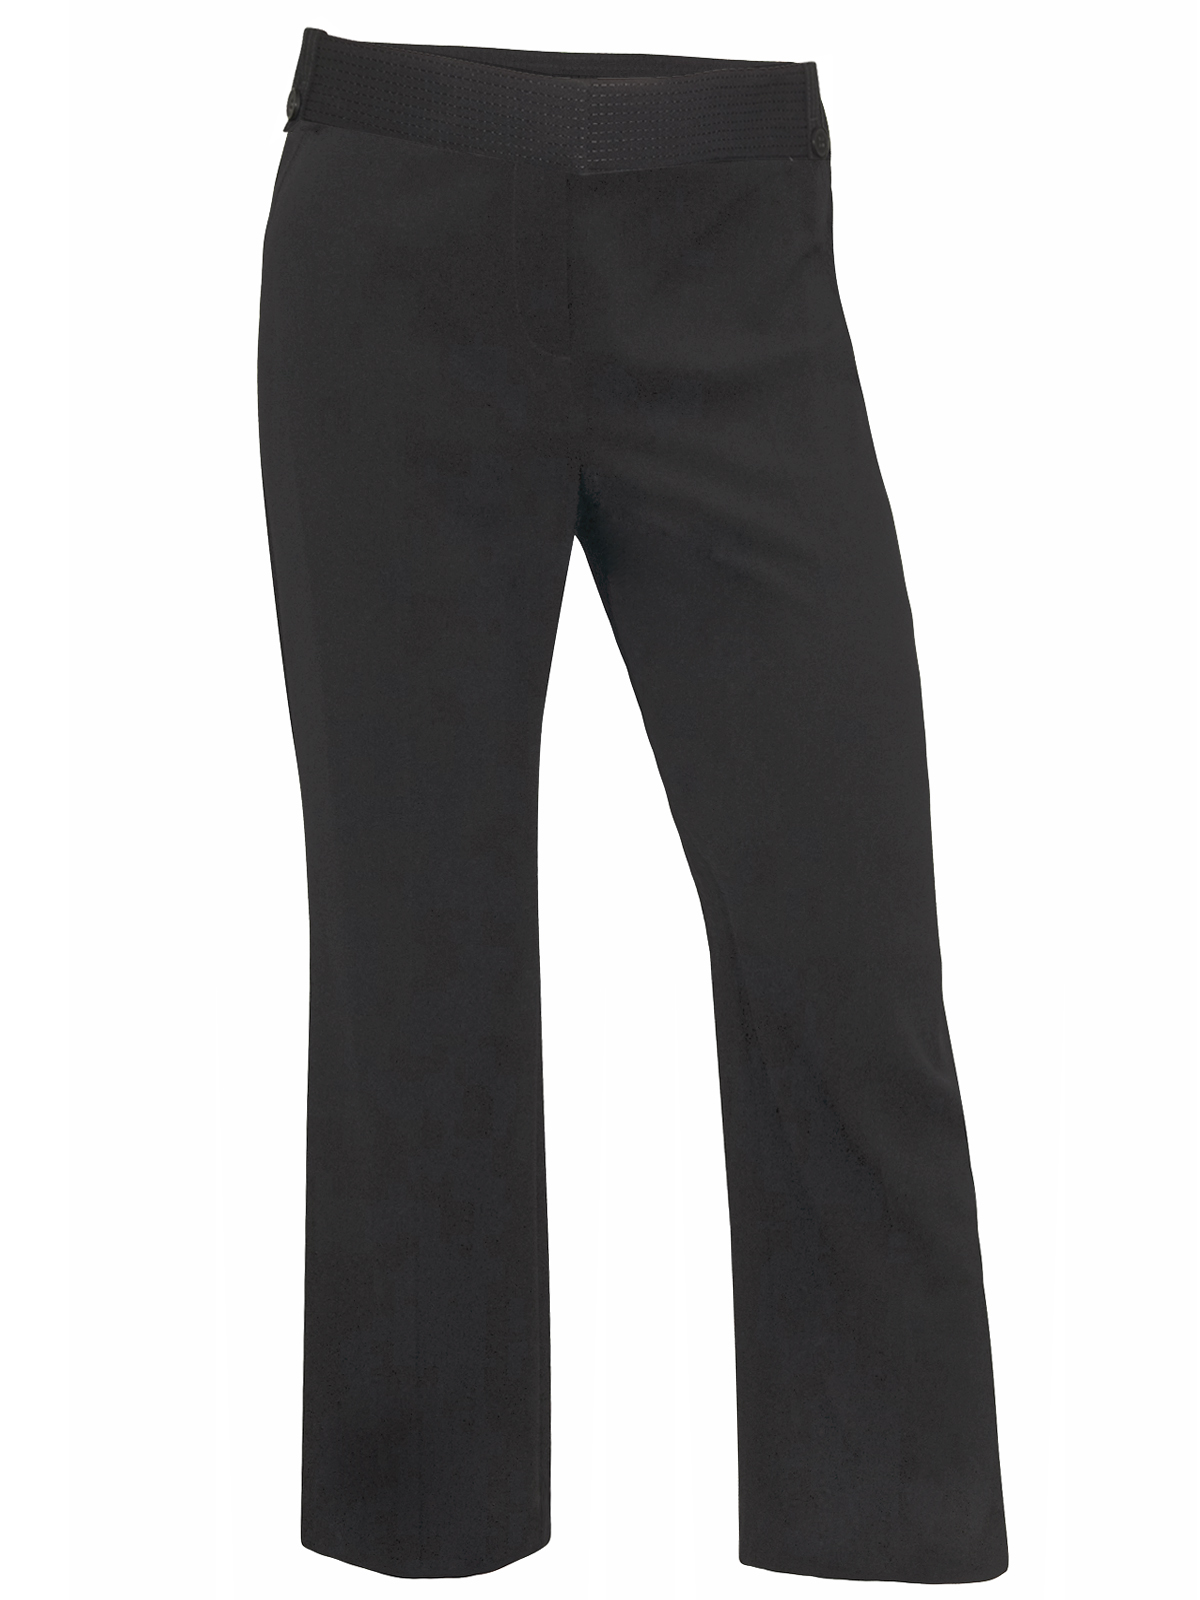 Marks and Spencer - - M&5 BLACK Stitched Waist Bootleg Trousers - Size ...